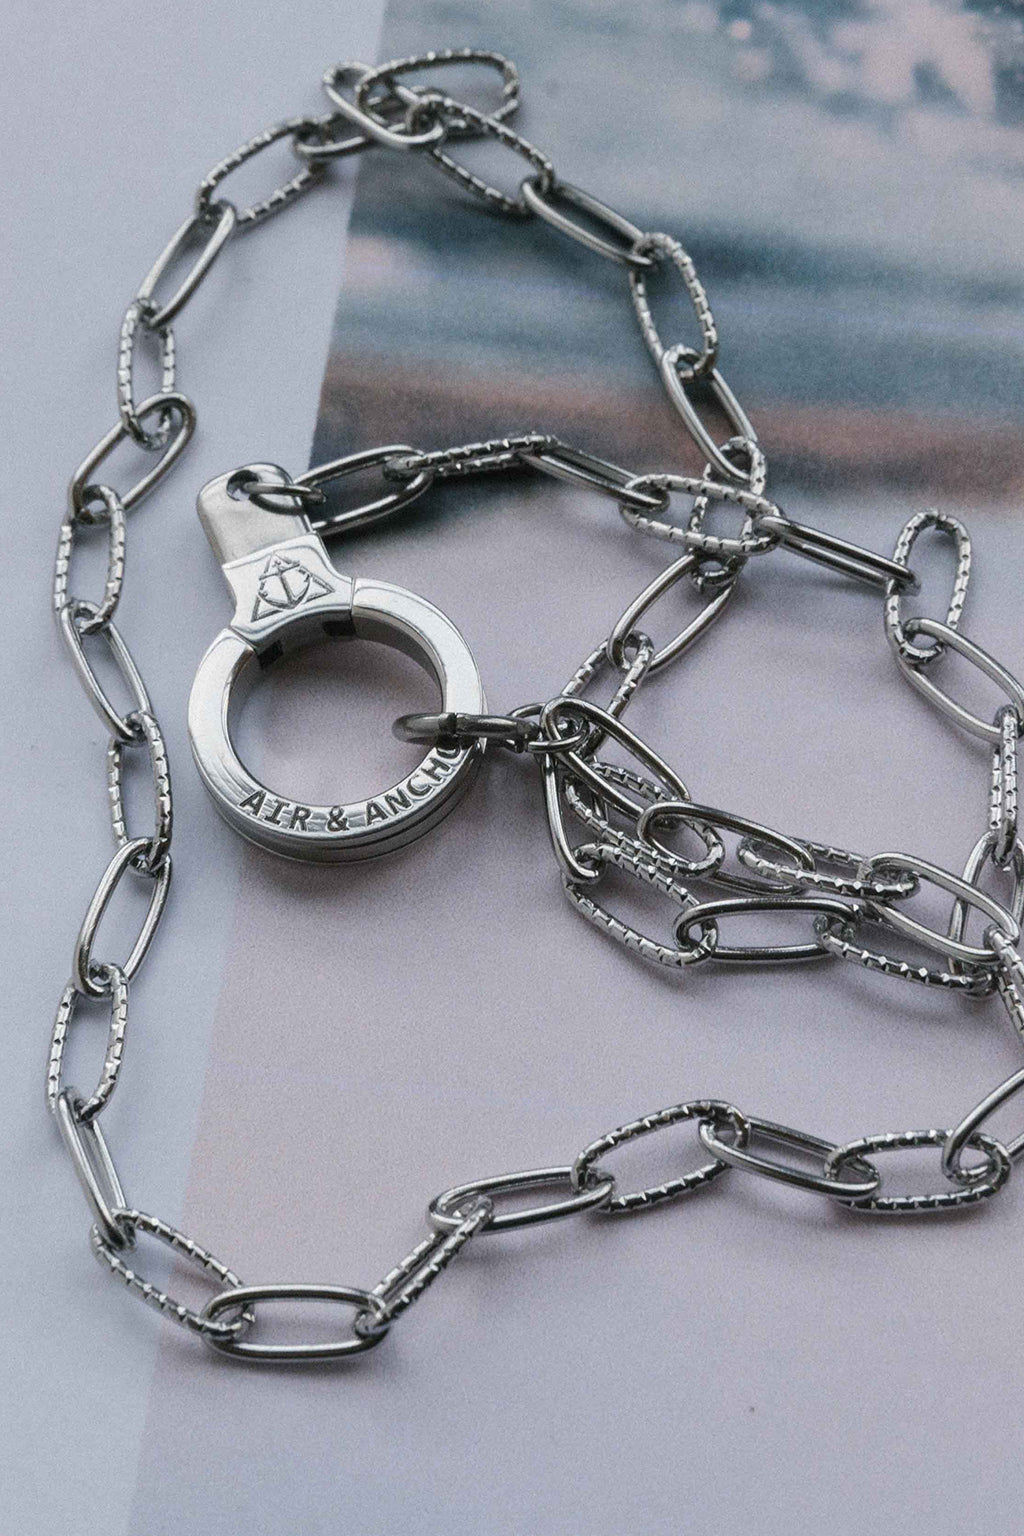 Wholesale Stainless Steel Chains | Wholesale Jewelry Website